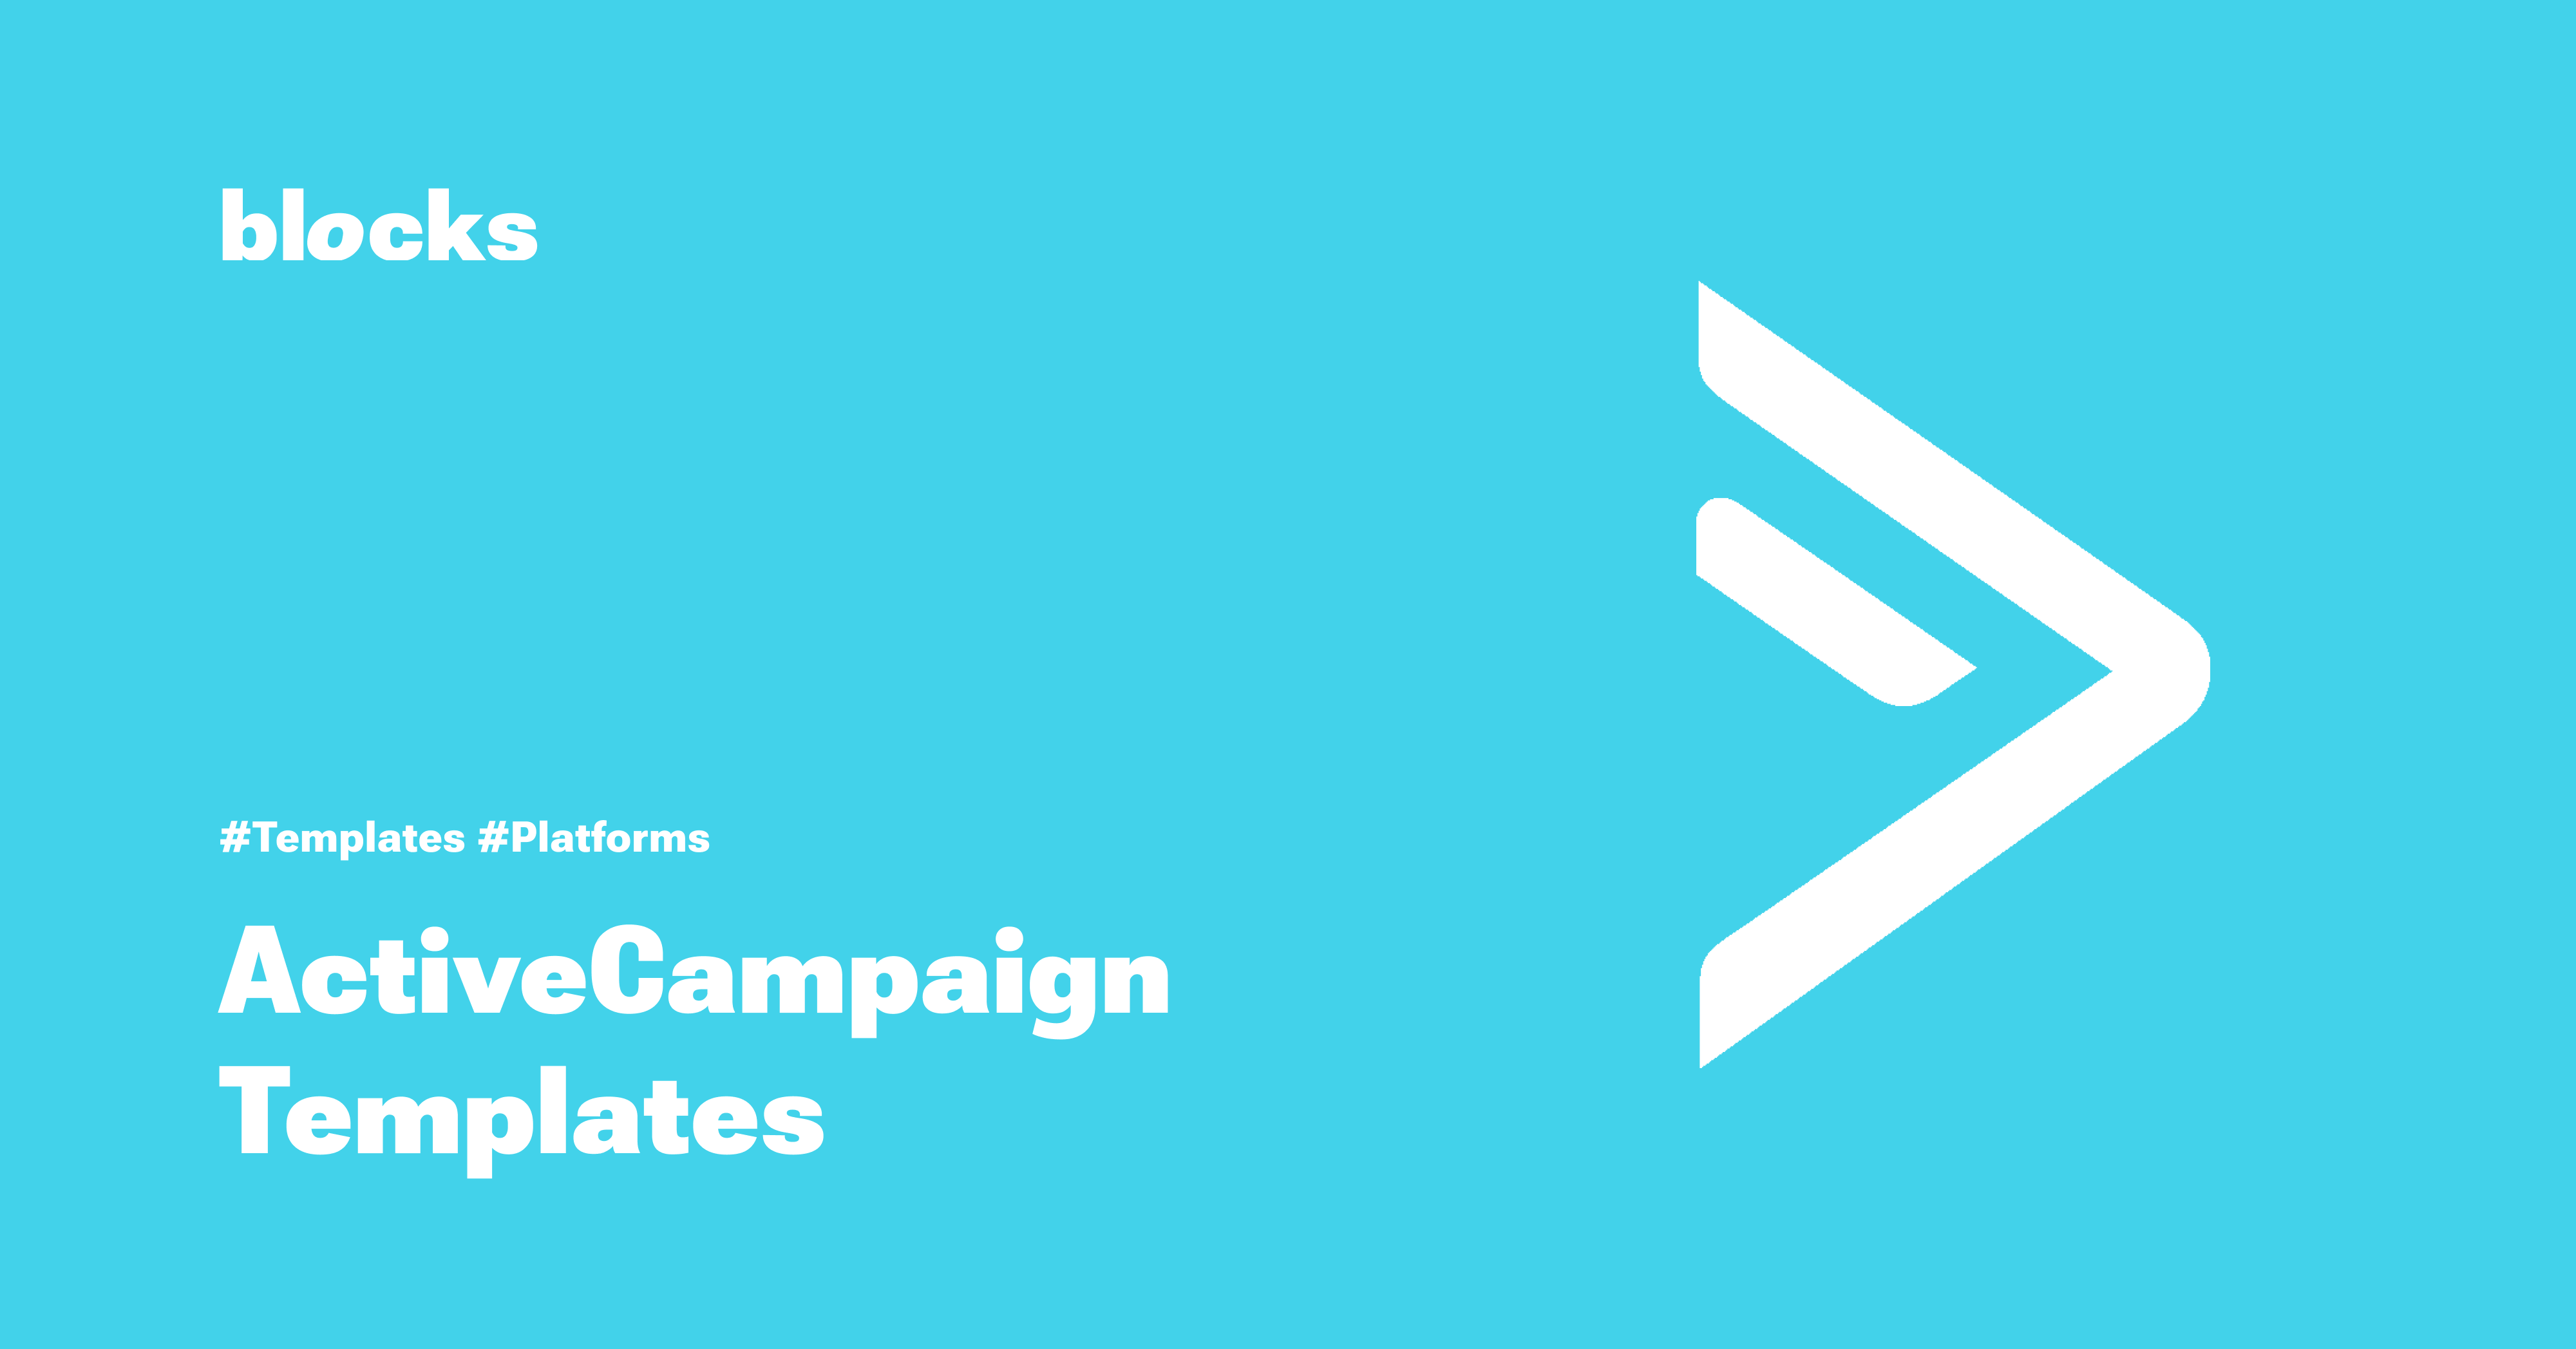 Free Email Templates for ActiveCampaign Blocks